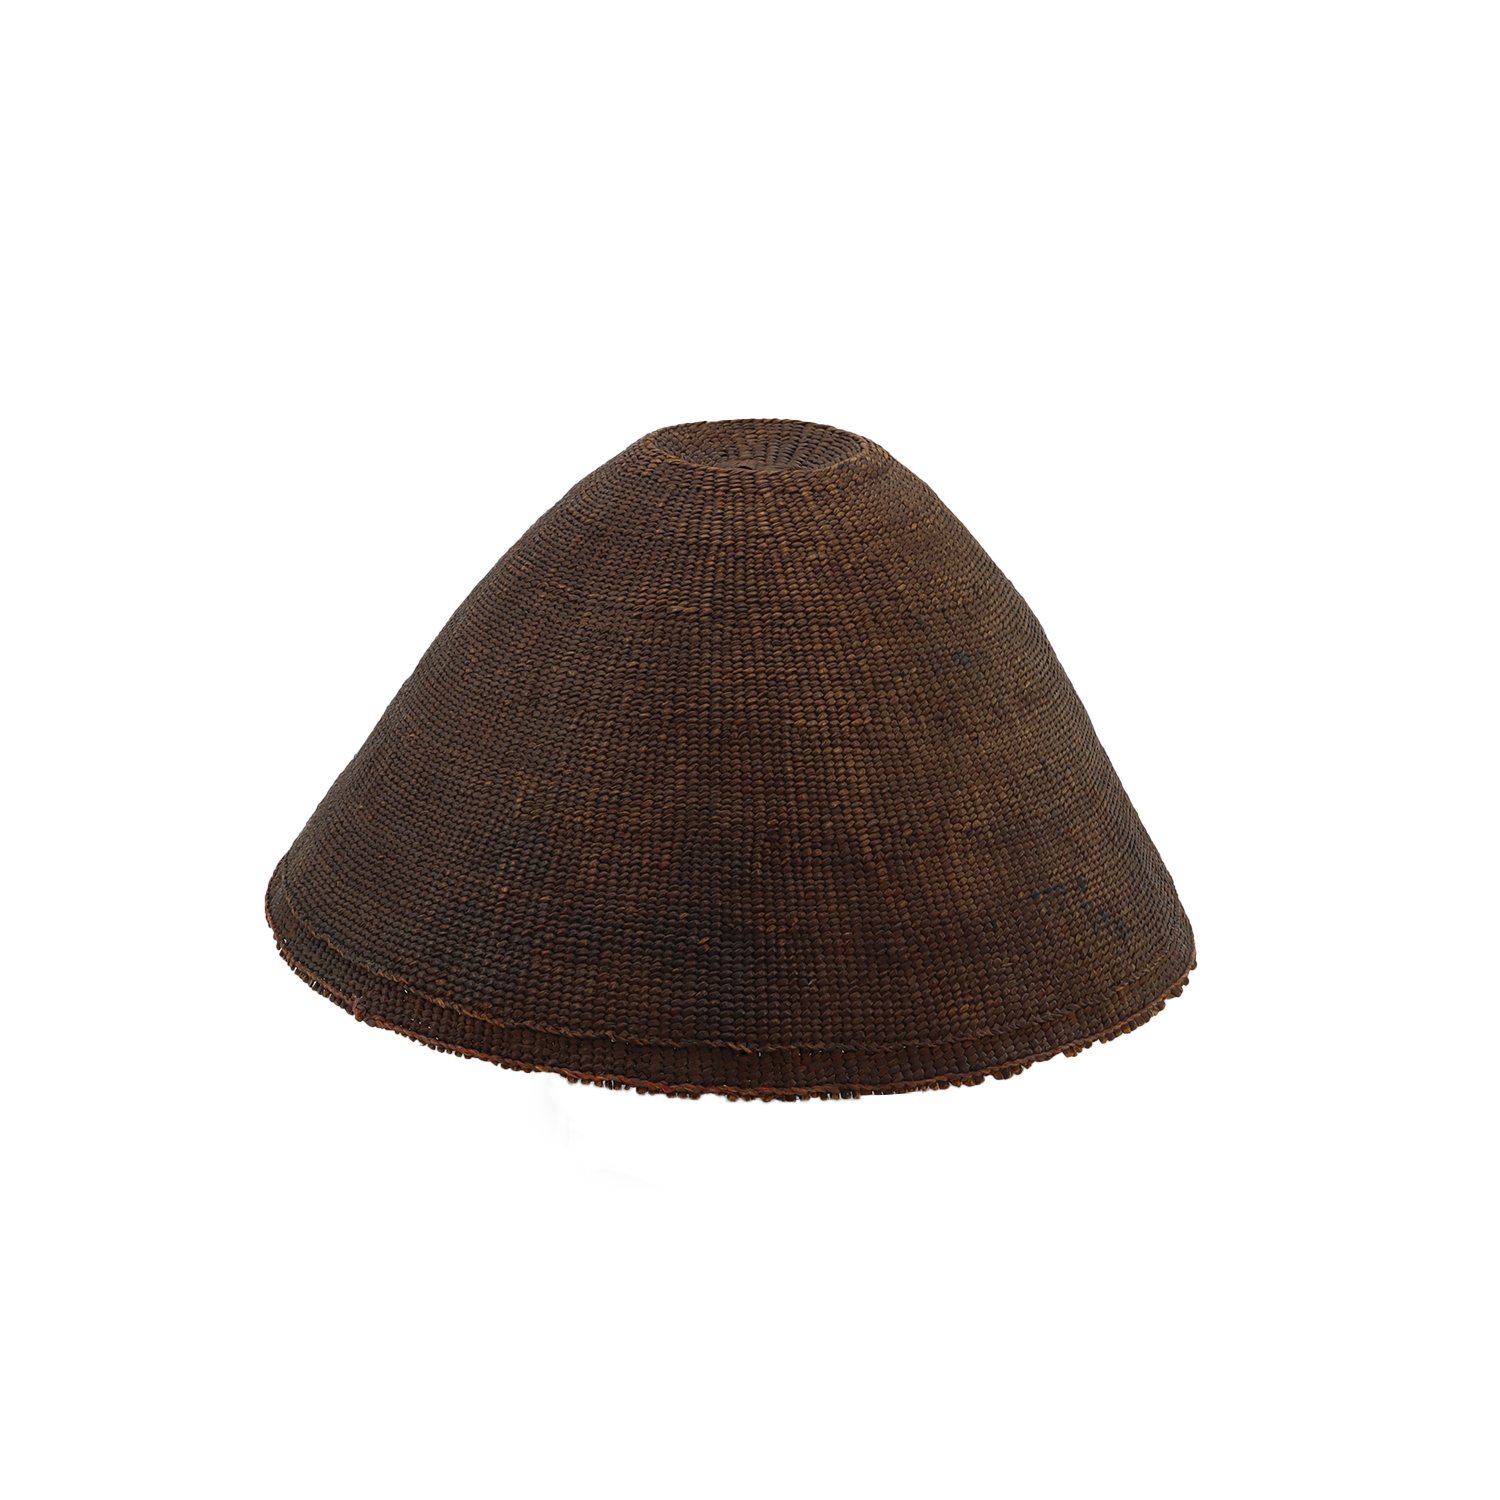 Early Nootka Spruce Root Hat, Late 19th Century Hat 